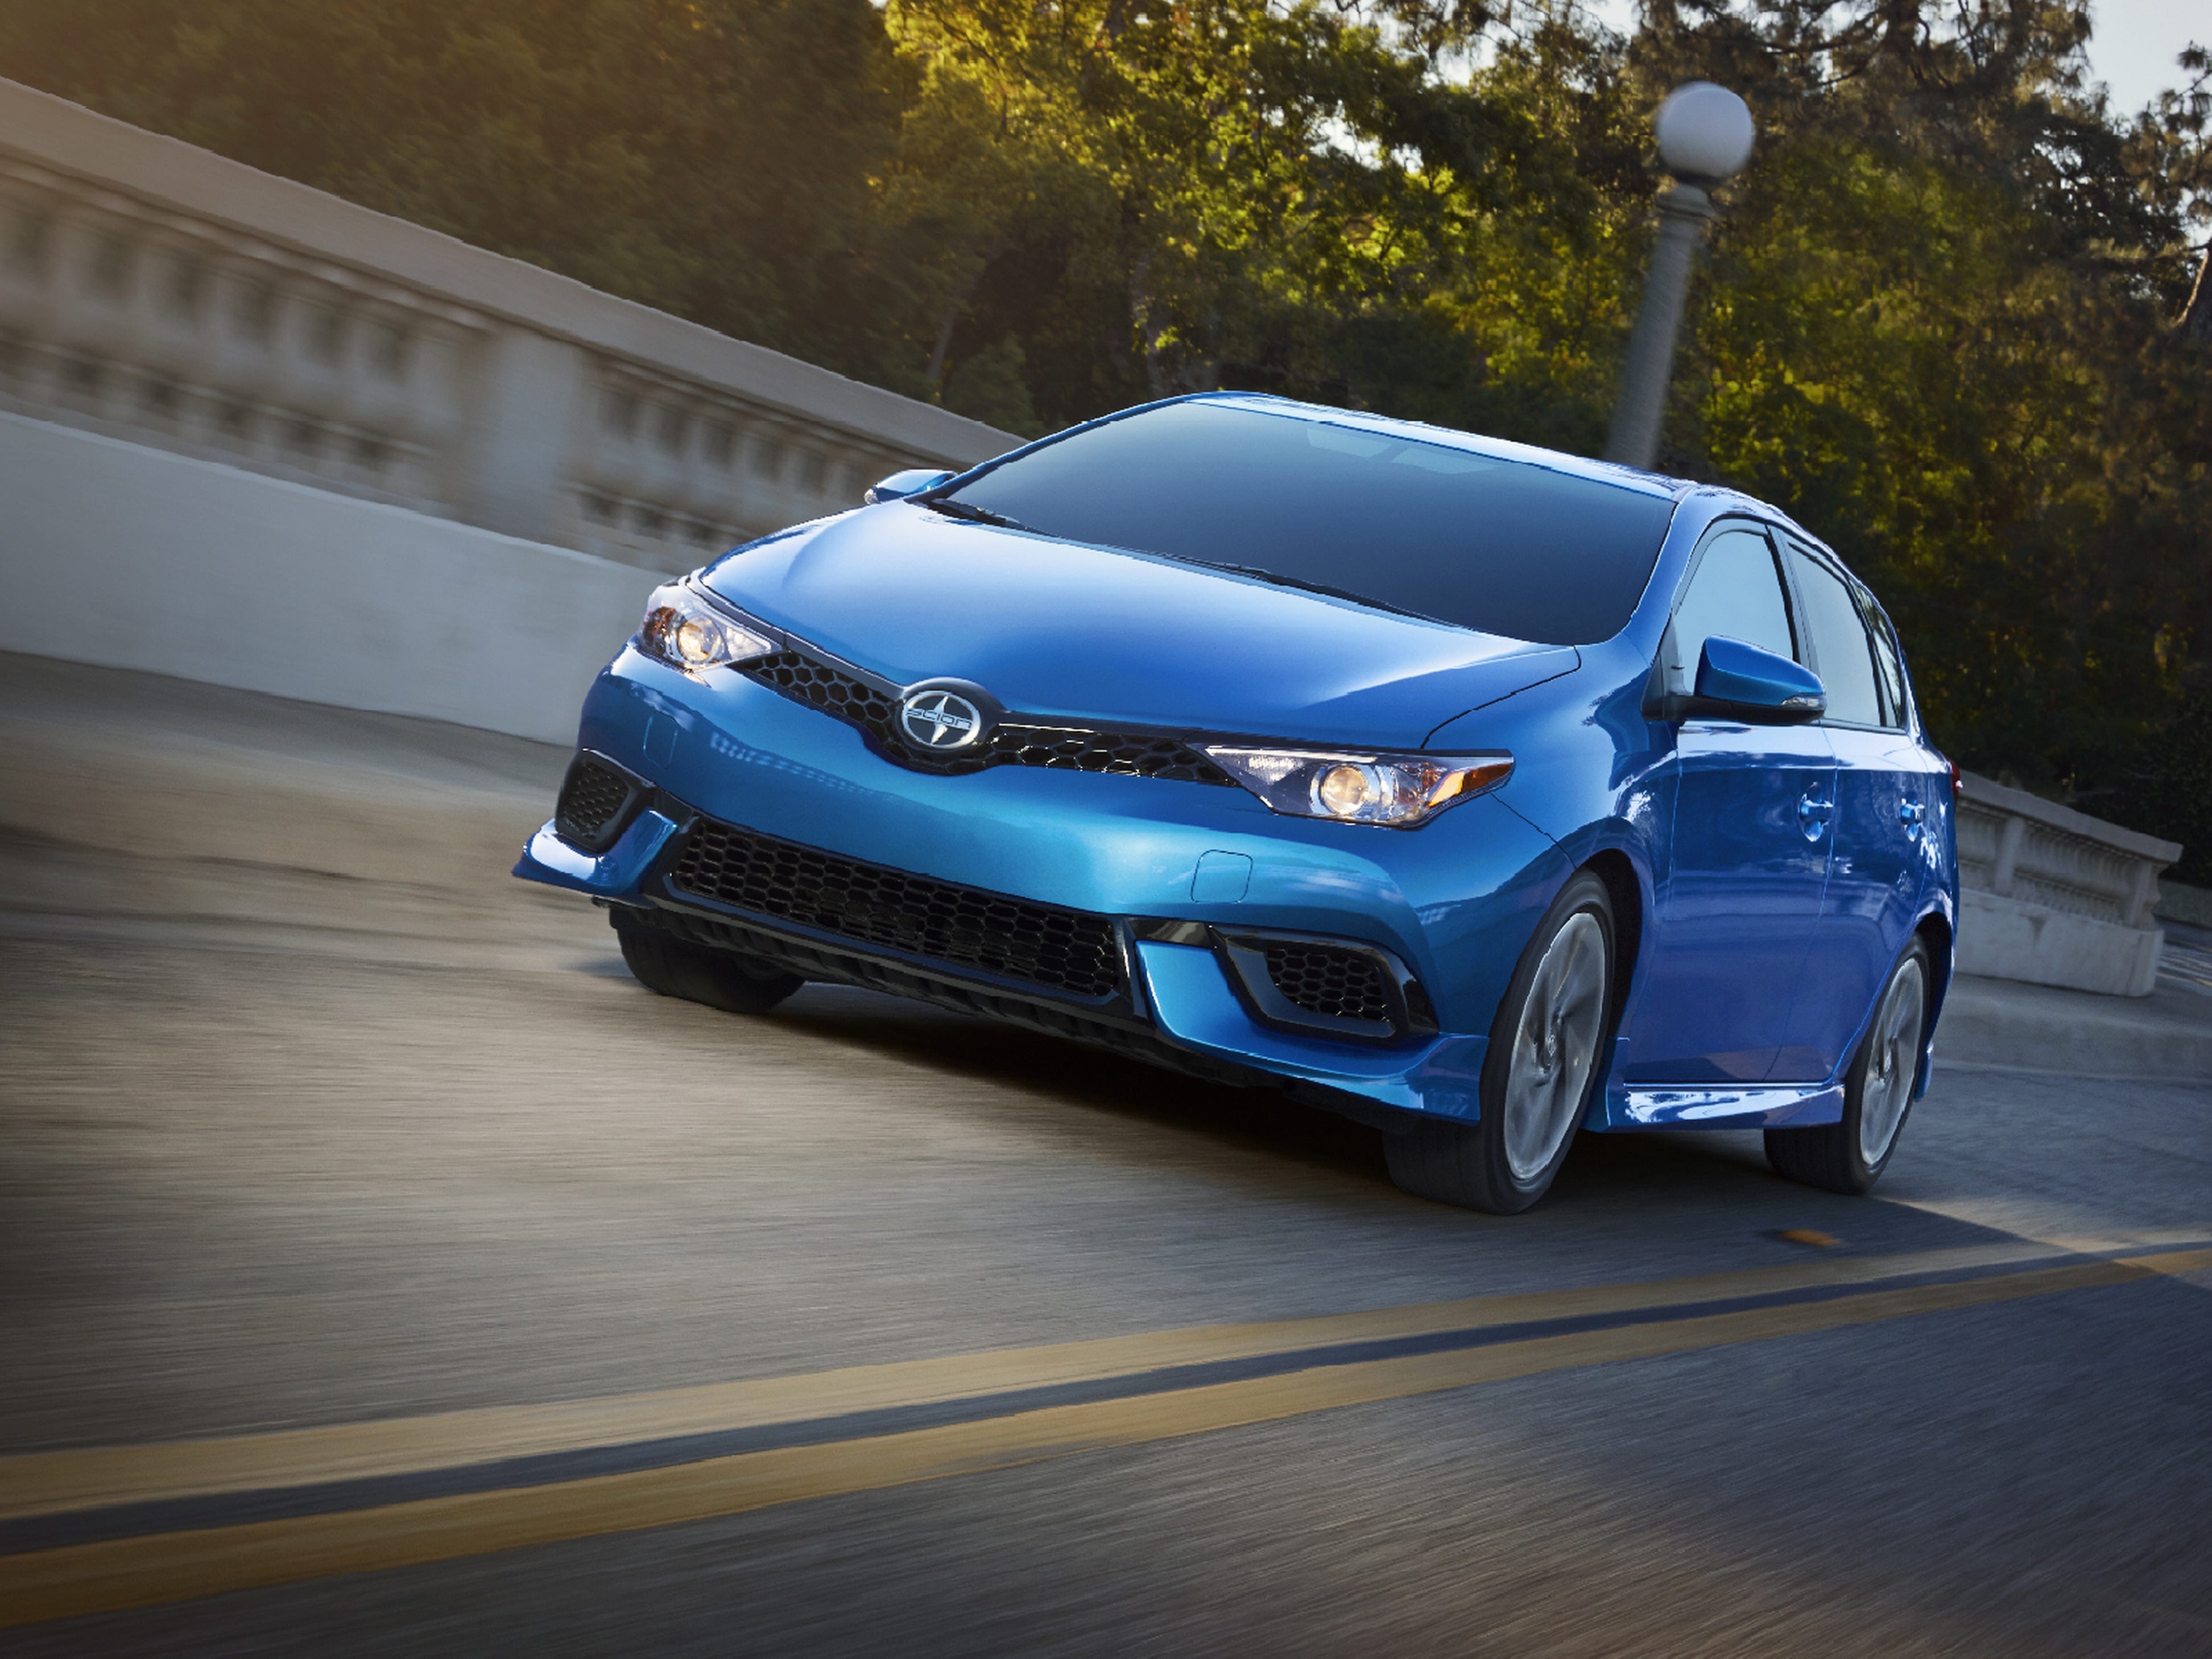 Toyota's Scion iM hatchback is contemporary, practical